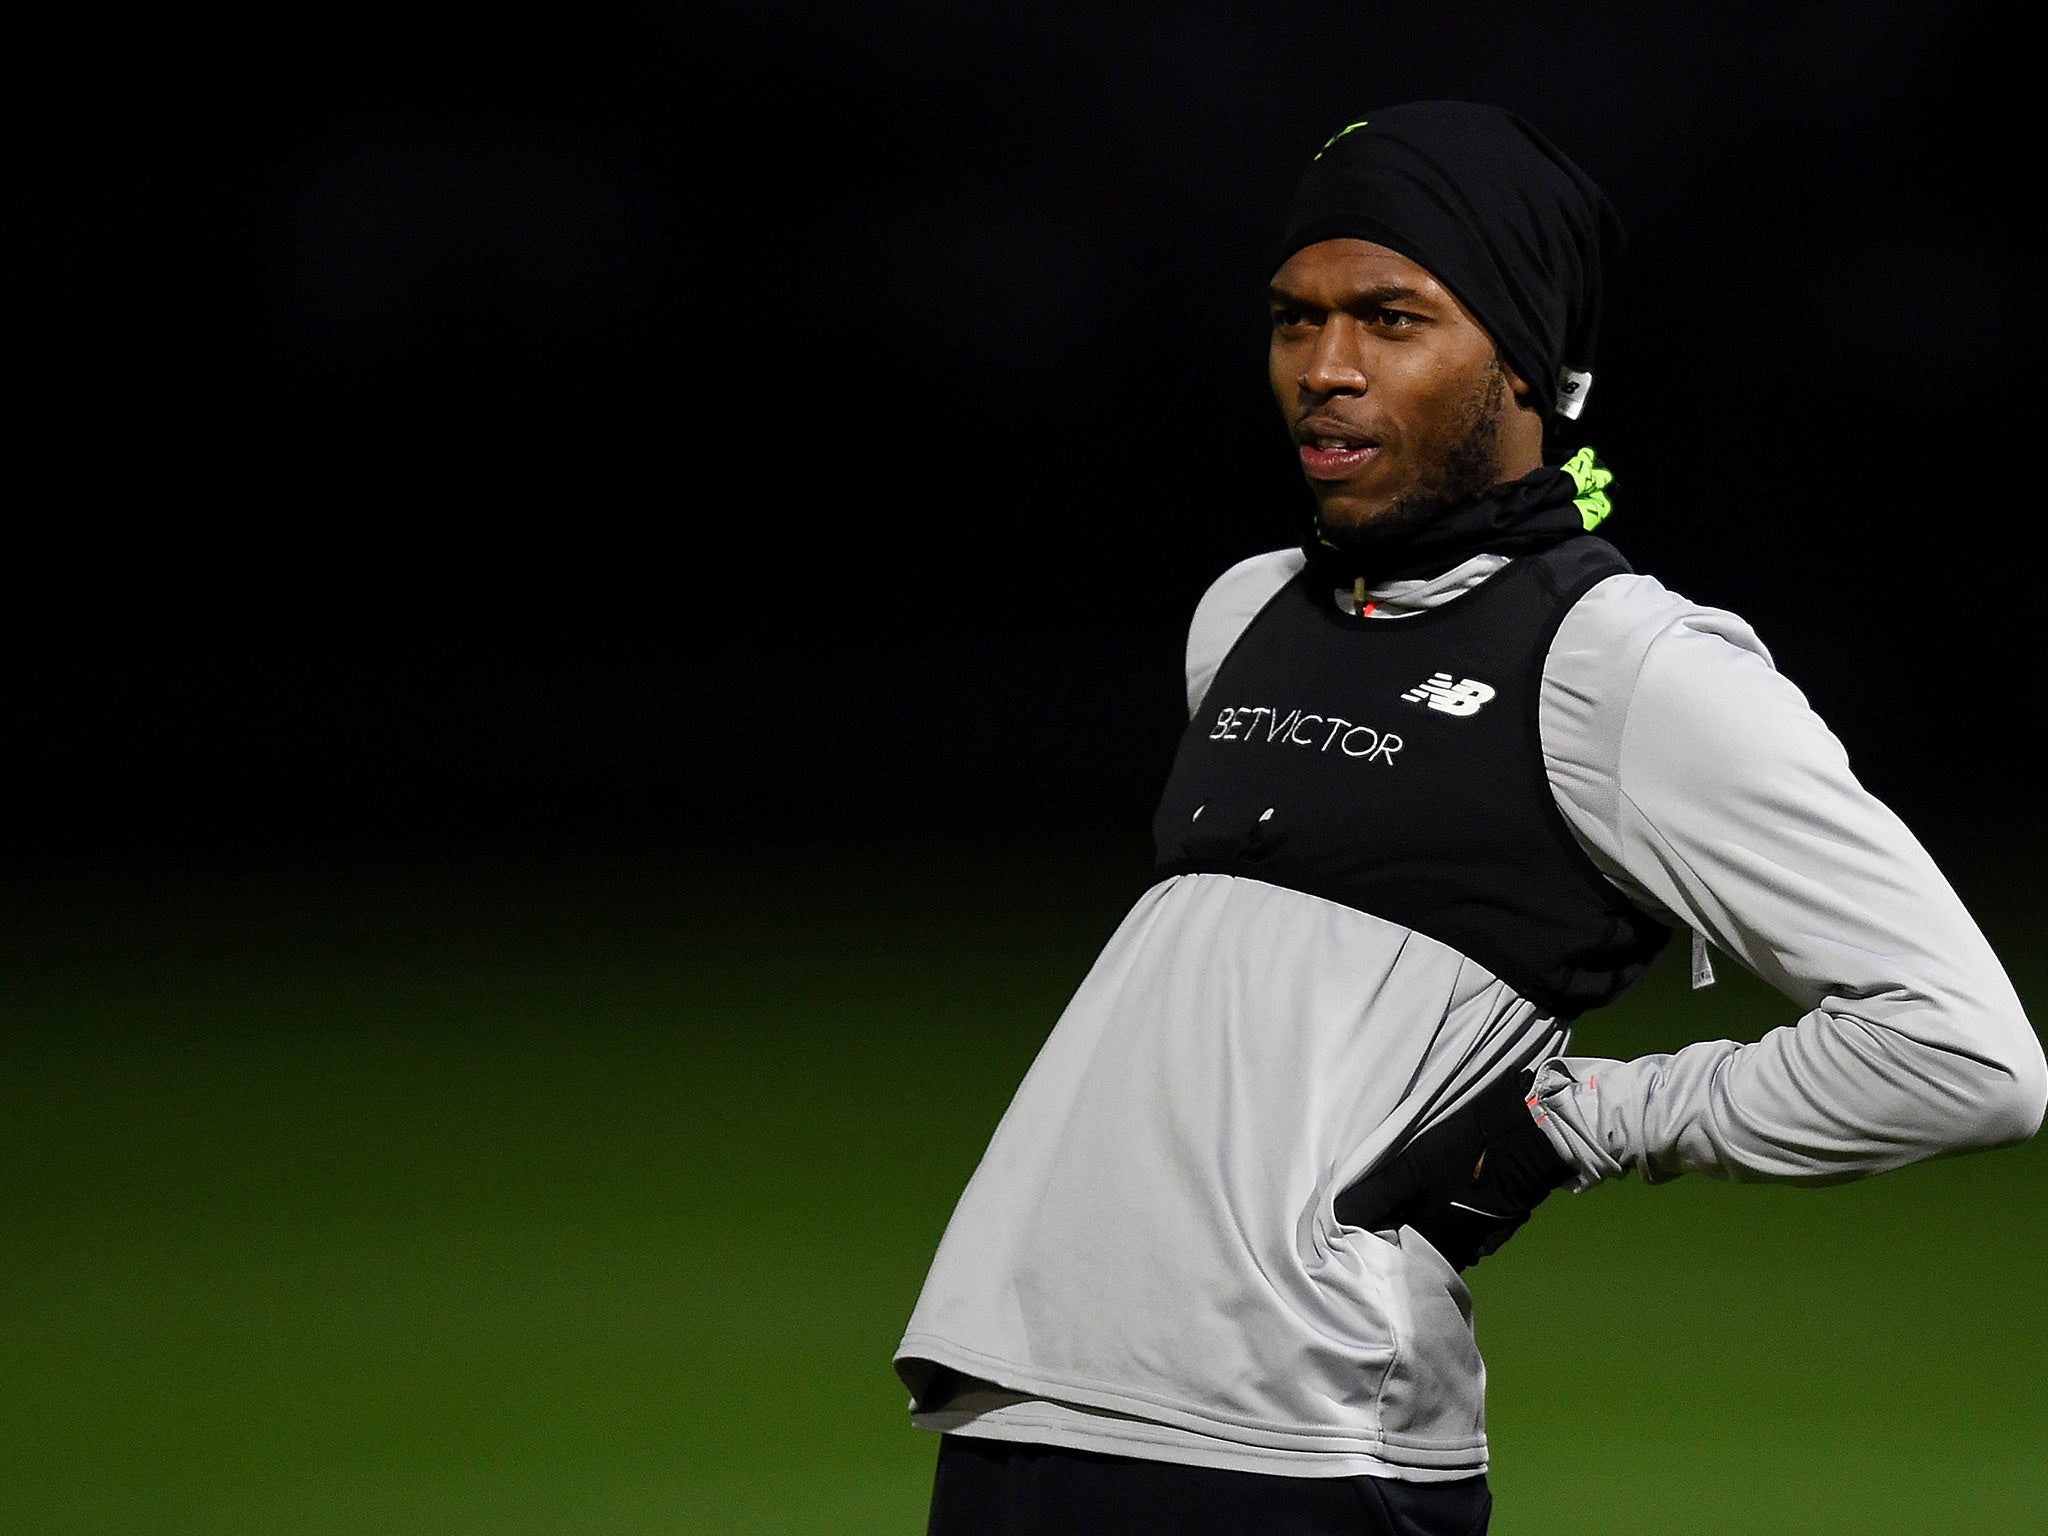 Daniel Sturridge's form has led to questions about his fitness